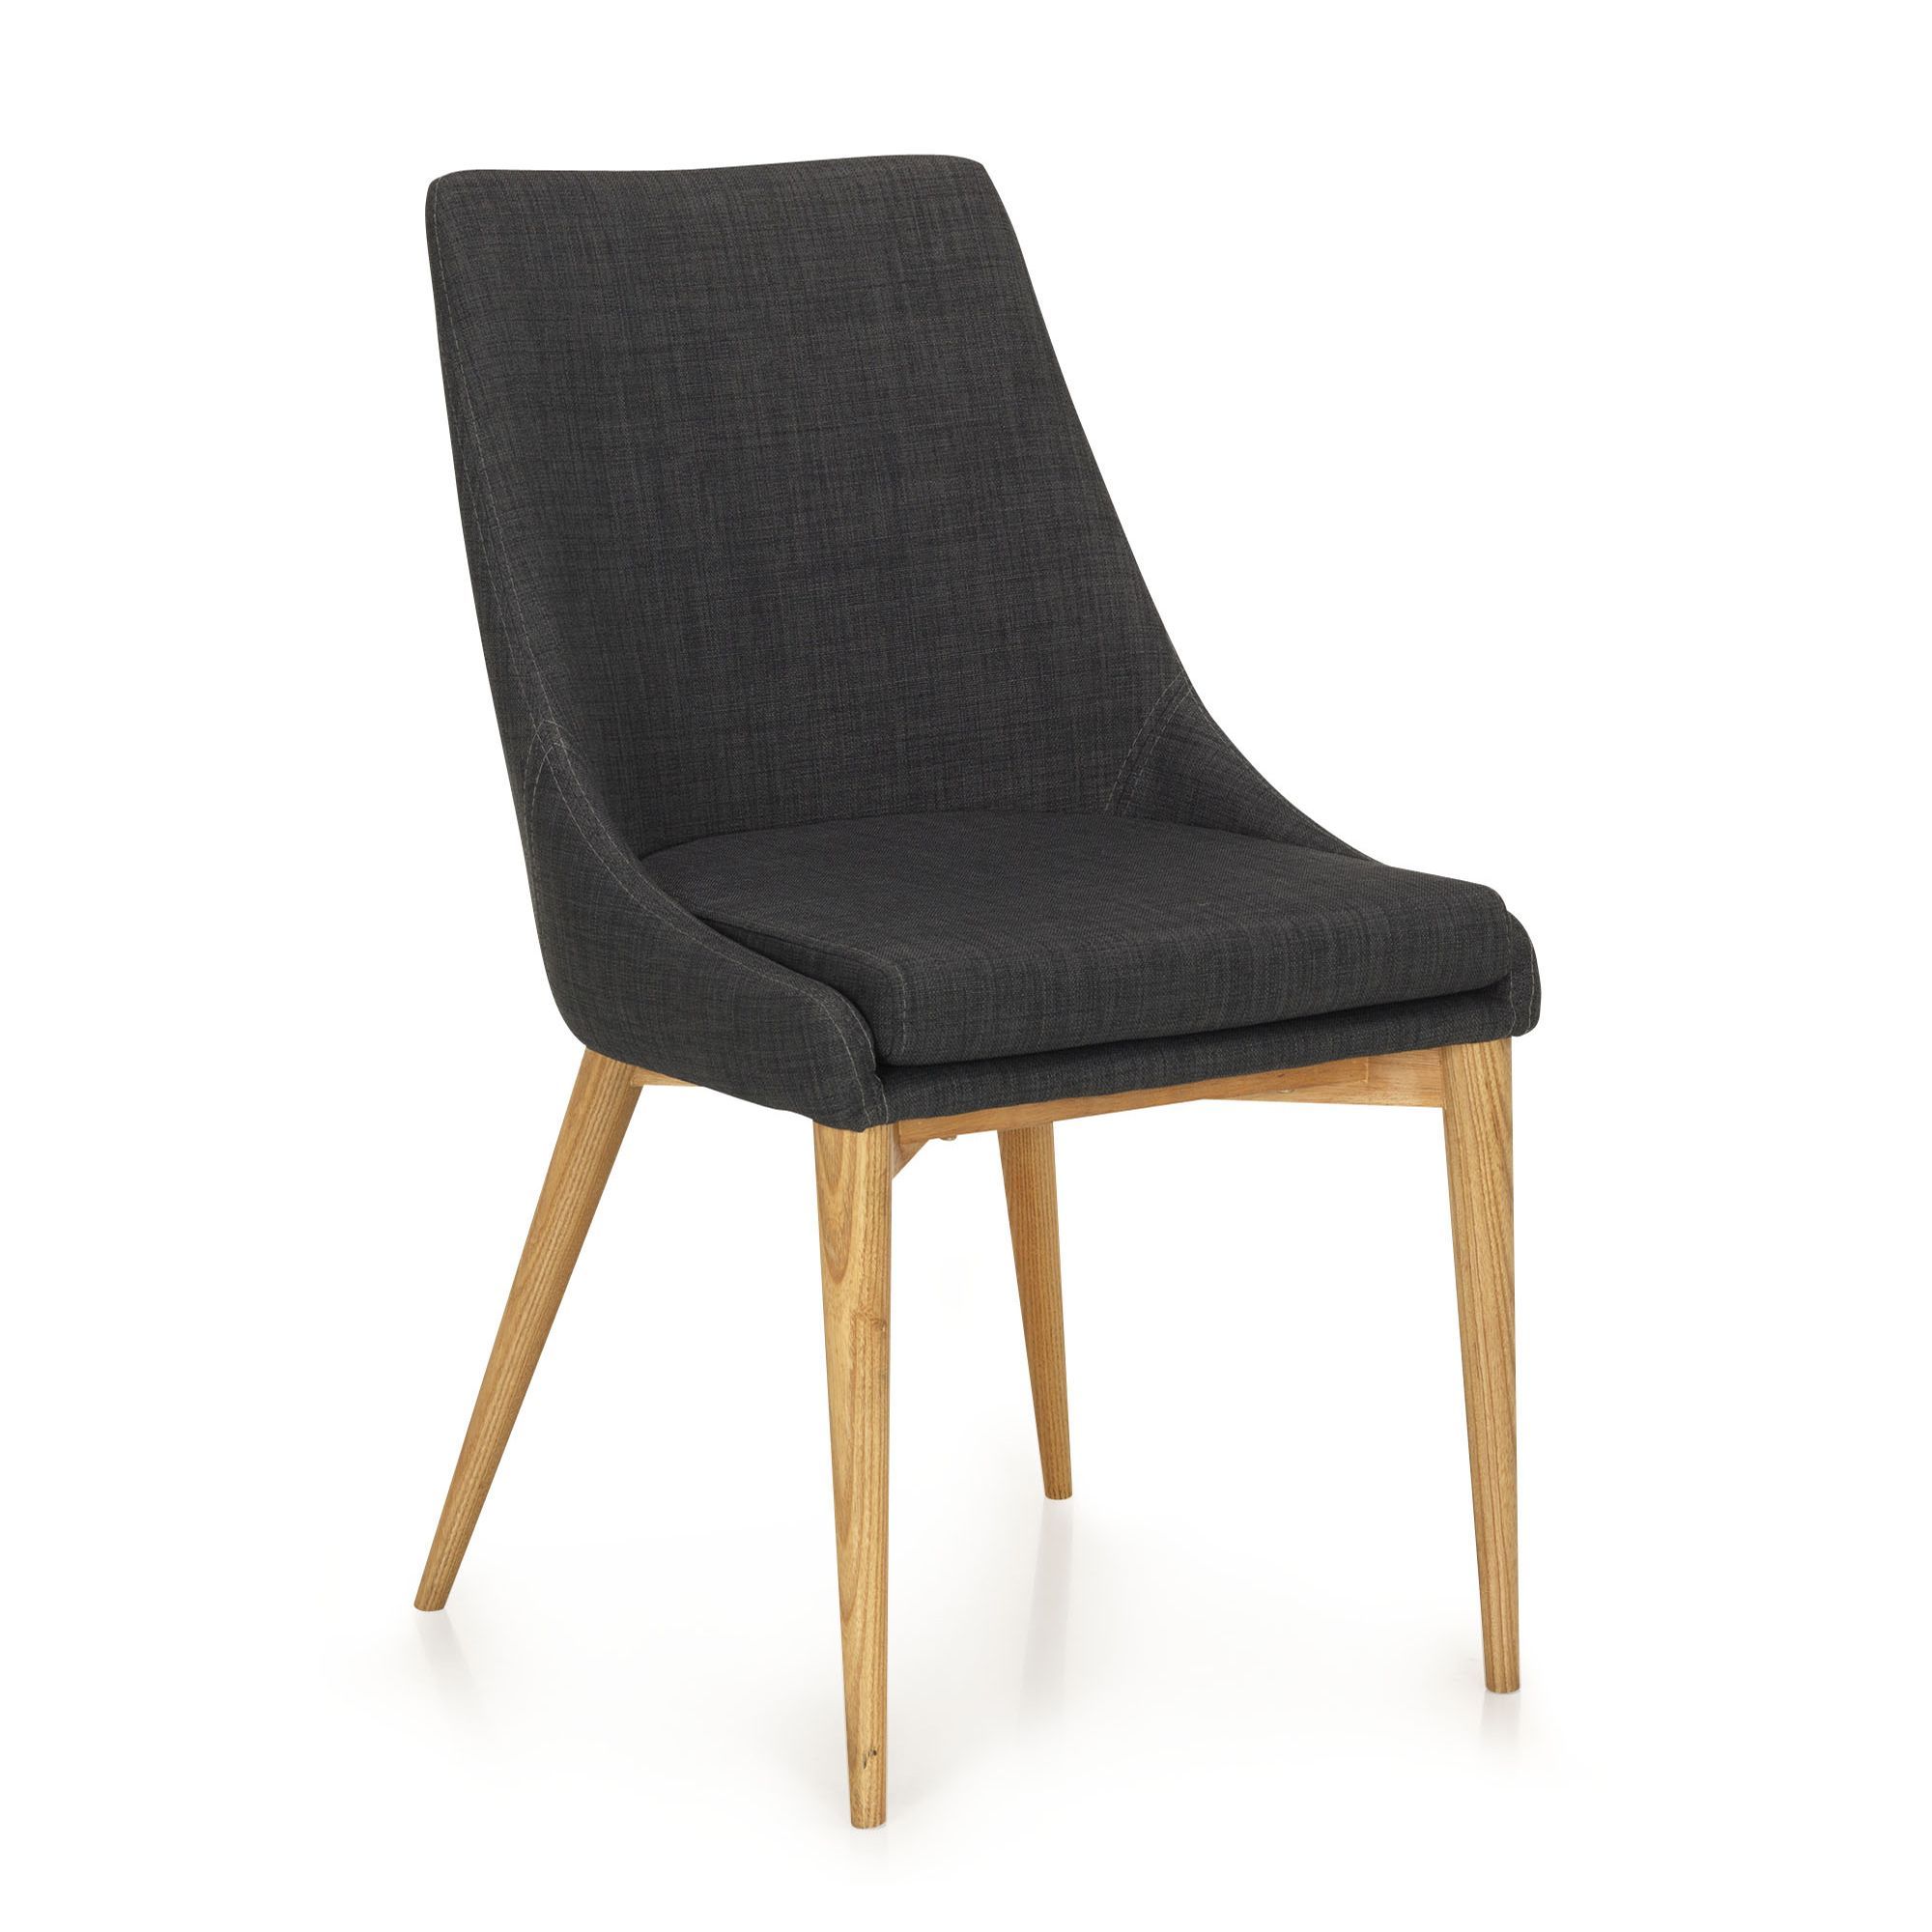 Chaise scandinave abby